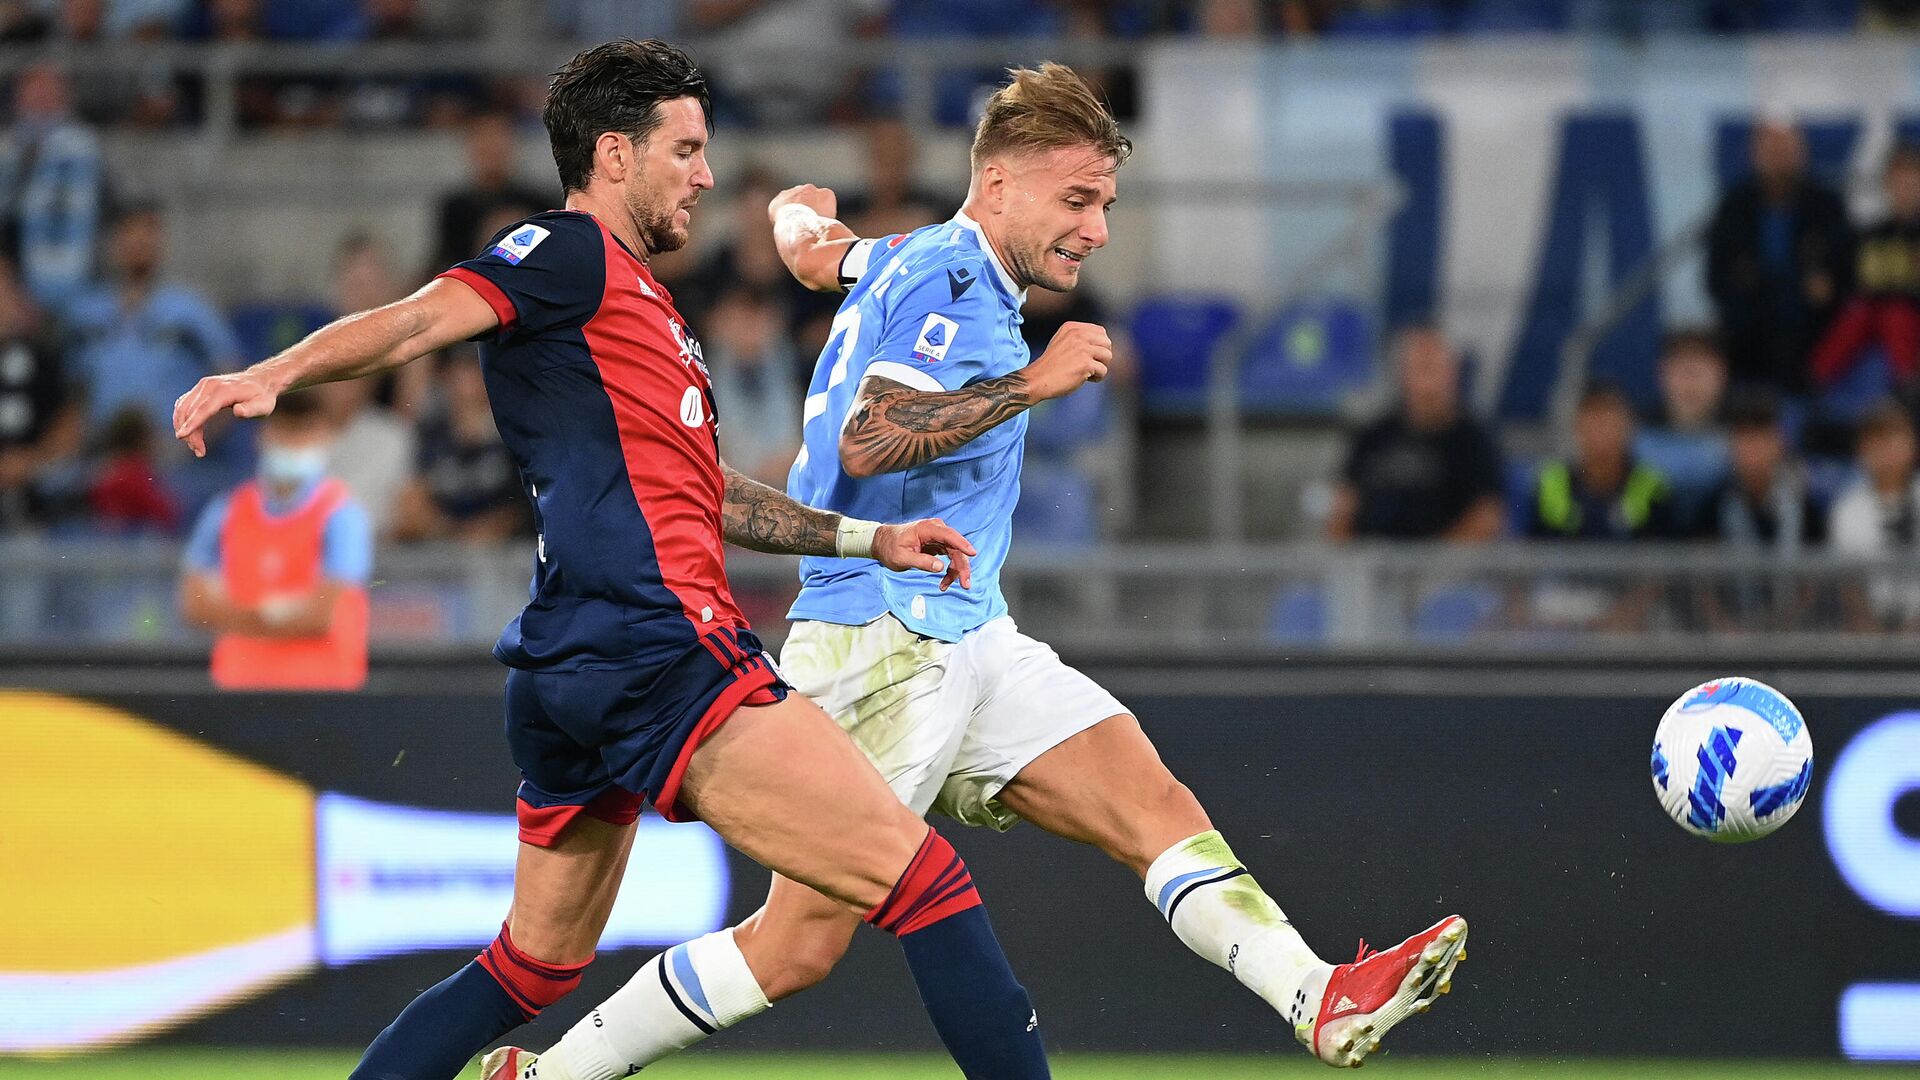 Lazio's Italian forward Ciro Immobile (R) fights for the ball Cagliari's Italian defender Luca Ceppitelli during the Italian Serie A football match between Lazio and Cagliari at the Olympic stadium, in Rome, on September 19, 2021. (Photo by Vincenzo PINTO / AFP) - РИА Новости, 1920, 19.09.2021